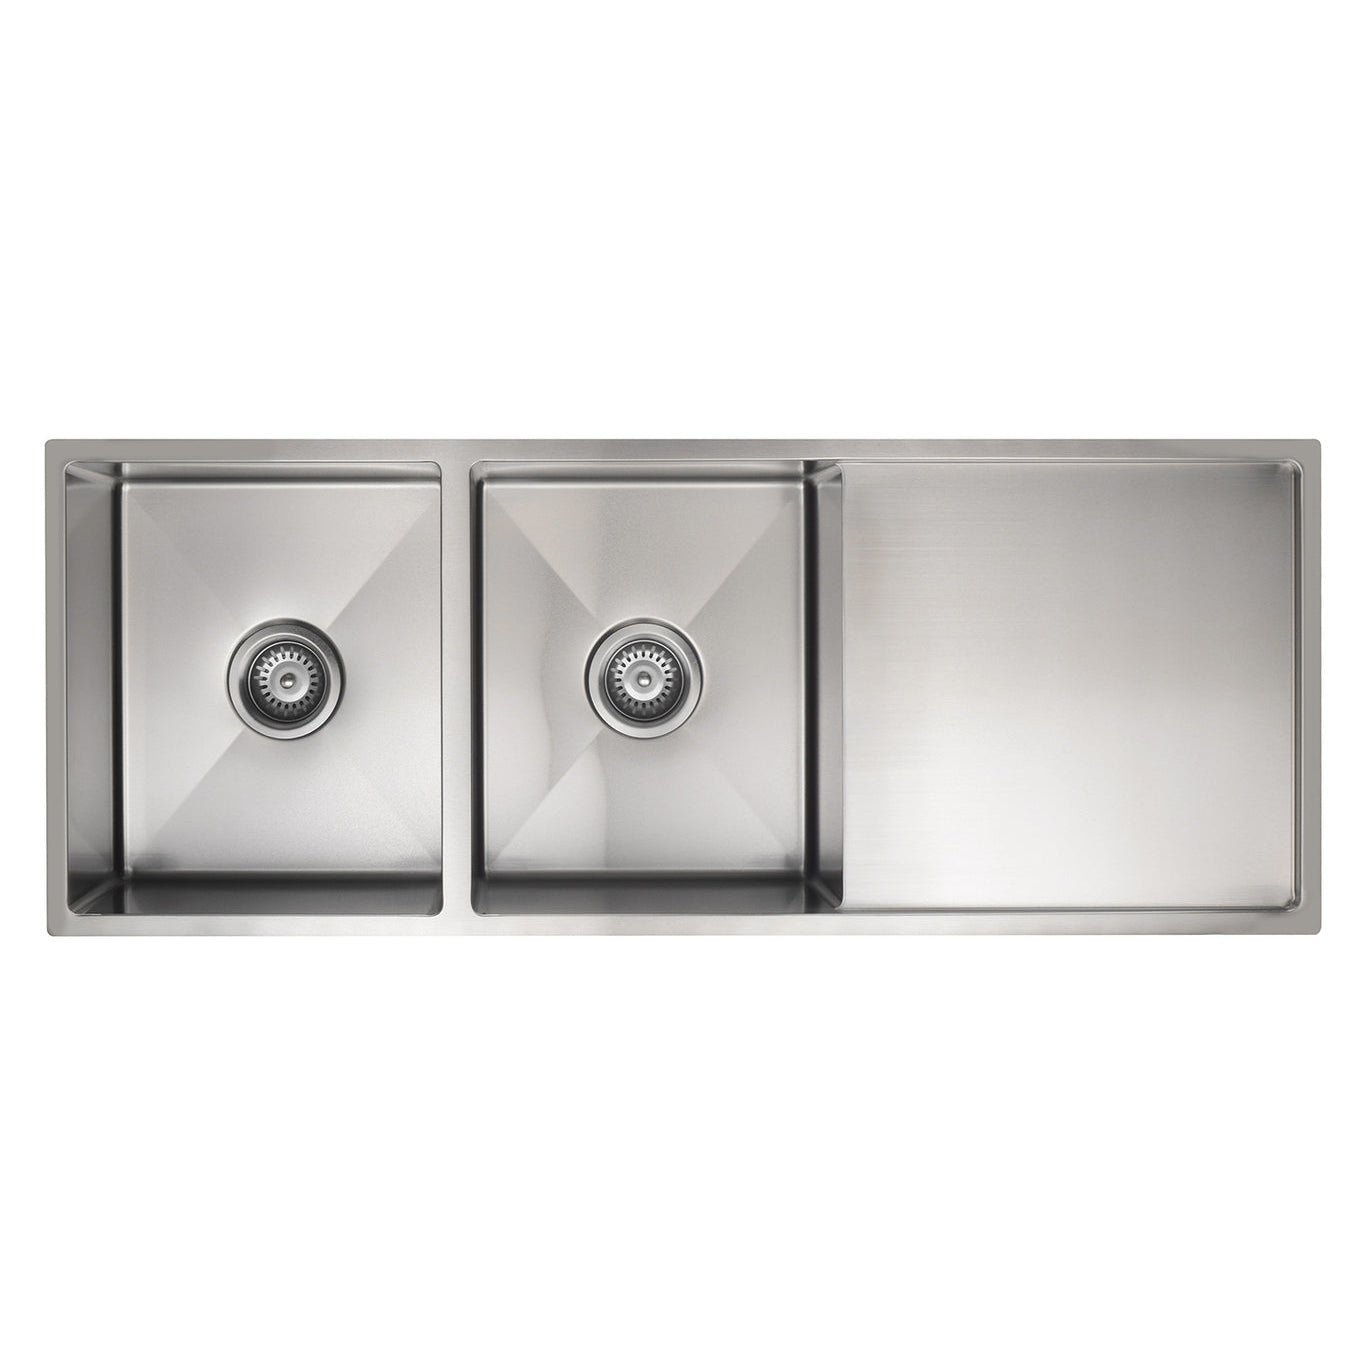 Kitchen Sink - Double Bowl & Drainboard 1160 x 440 - Brushed Nickel